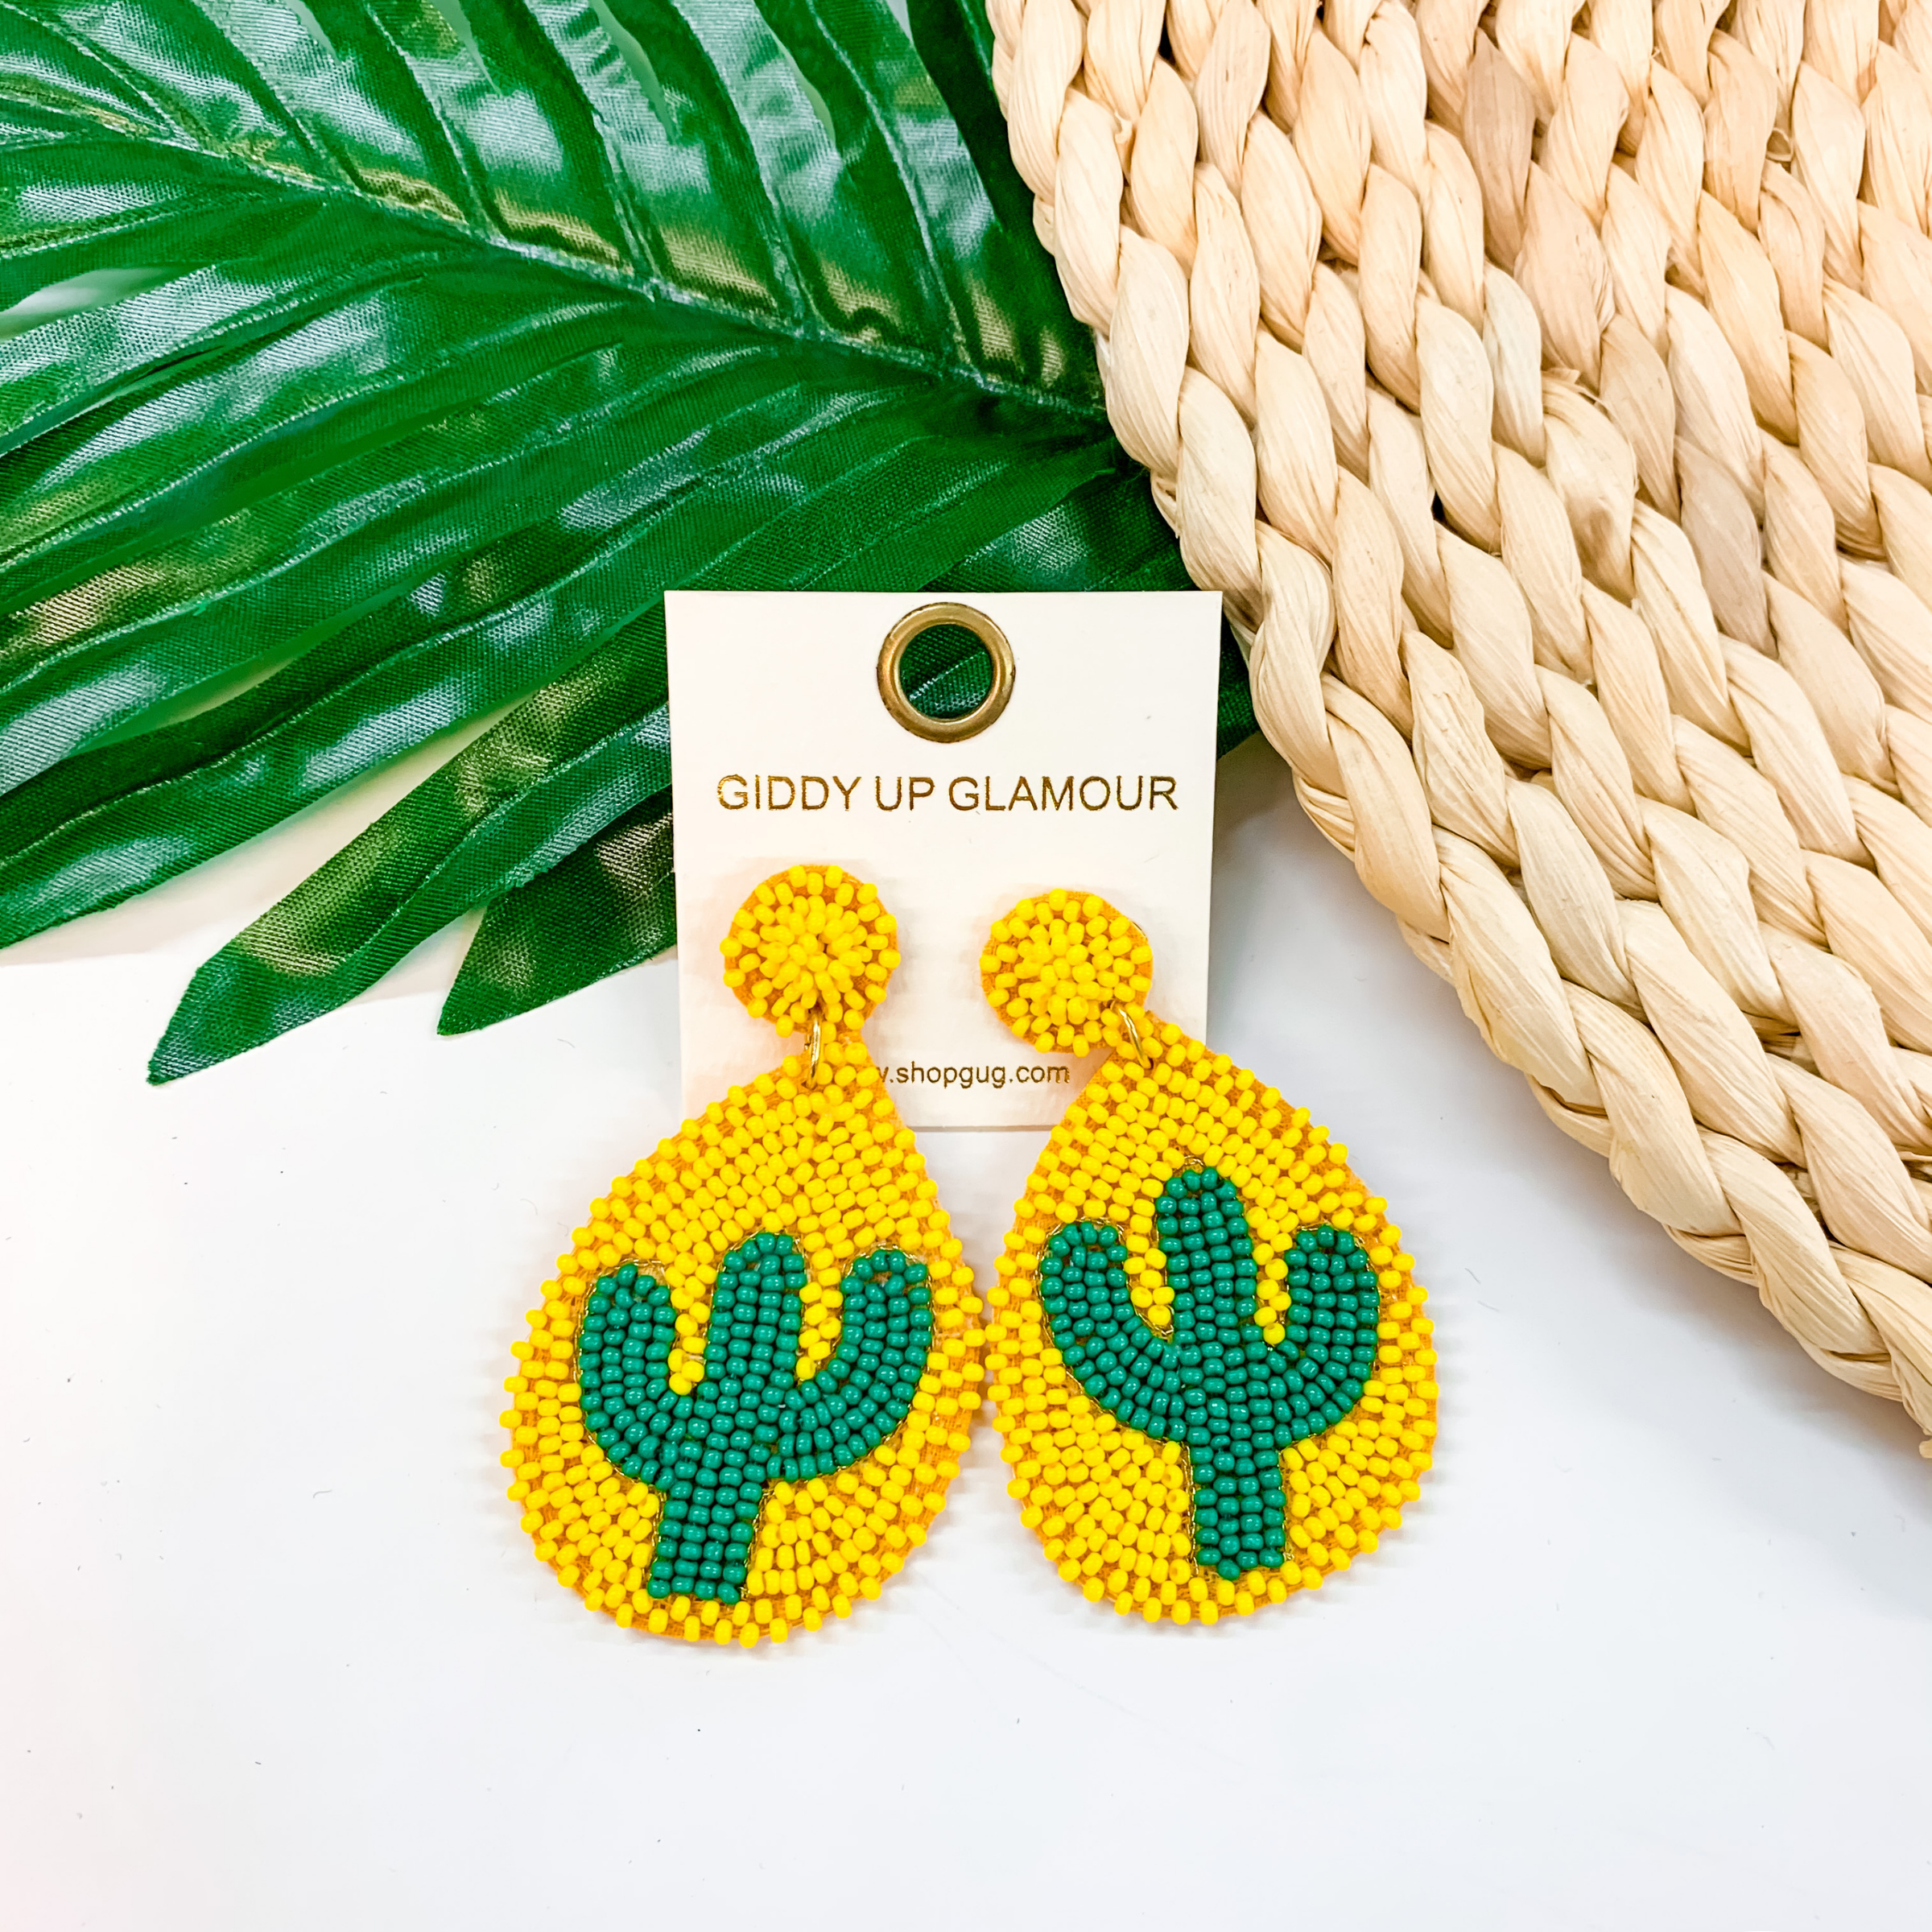 Lookin' Sharp Seed Bead Cactus Teardrop Earrings In Yellow and Green - Giddy Up Glamour Boutique